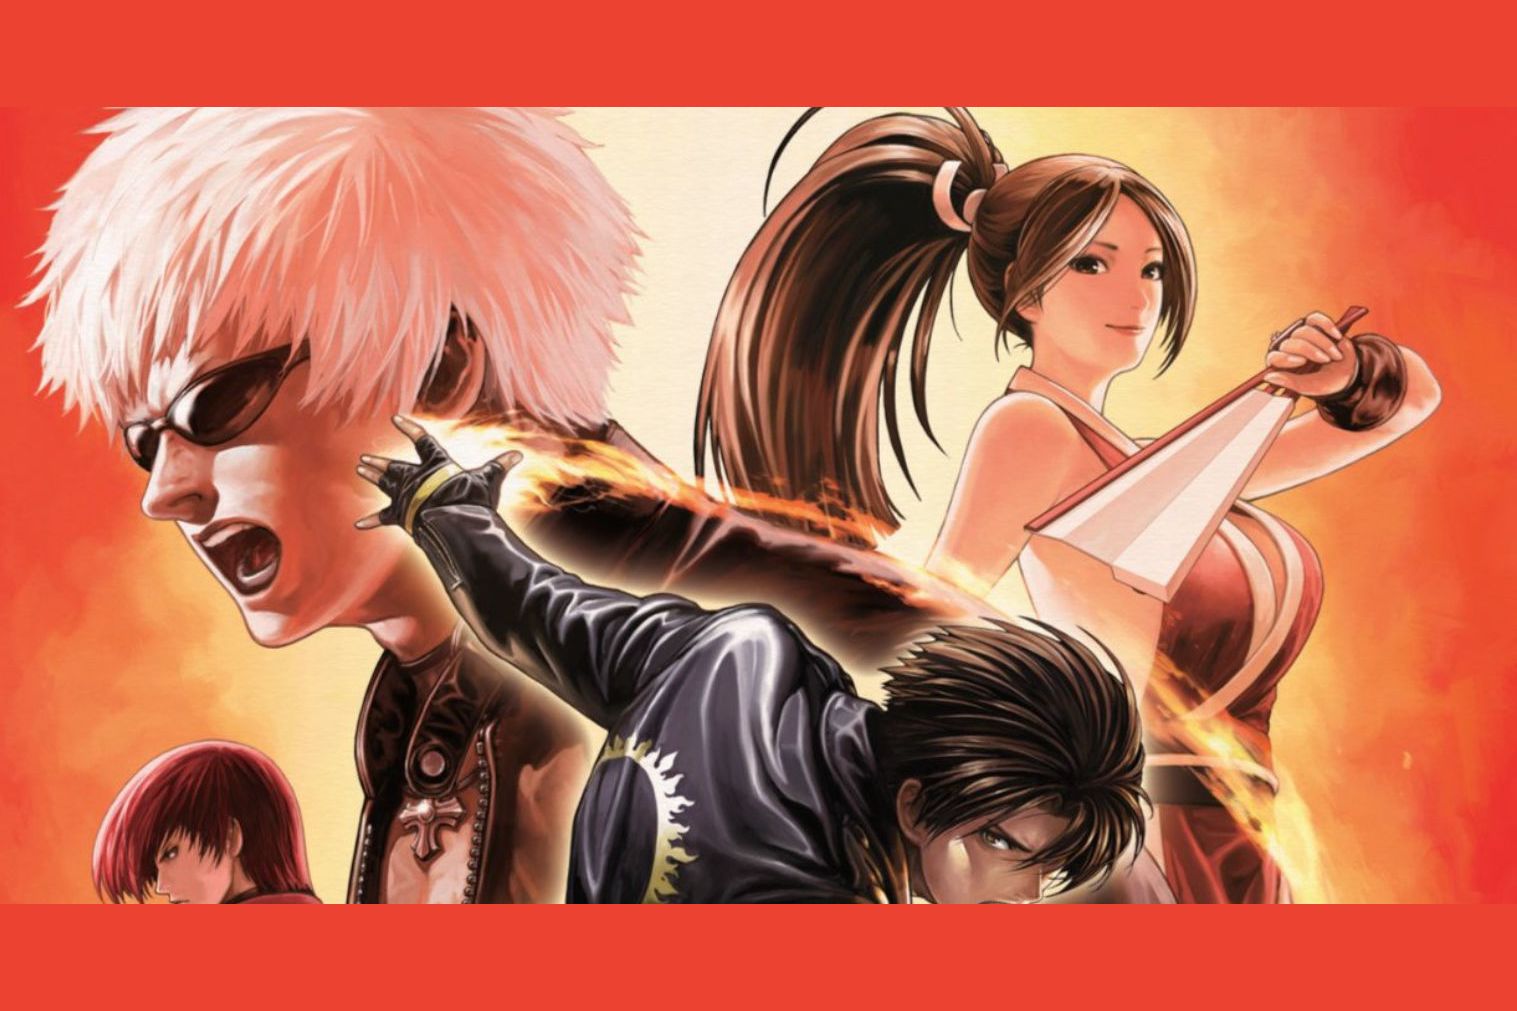 3 13 король. The King of Fighters XIII. King of Fighters 13. KOF 13 King. The King of Fighters XII.